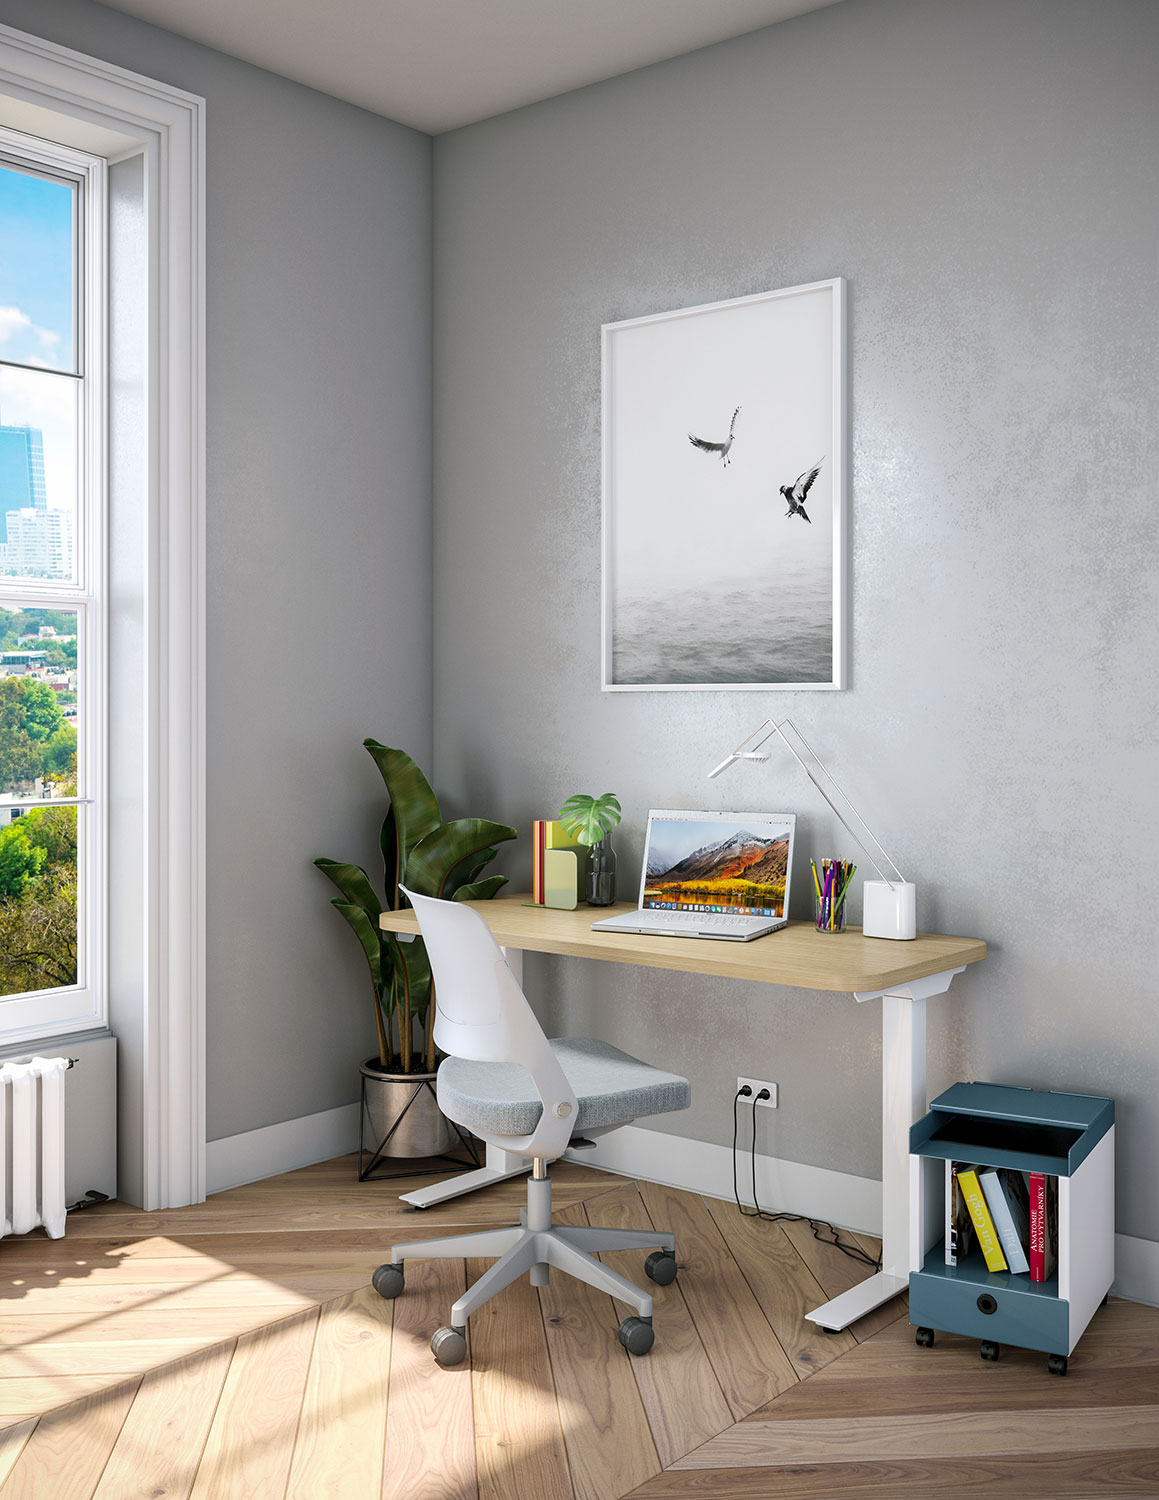 Hipso Height-Adjustable Desk with Ollo Light Task Chair and Muuto accessories Work from Home Inspiration from Knoll and Muuto